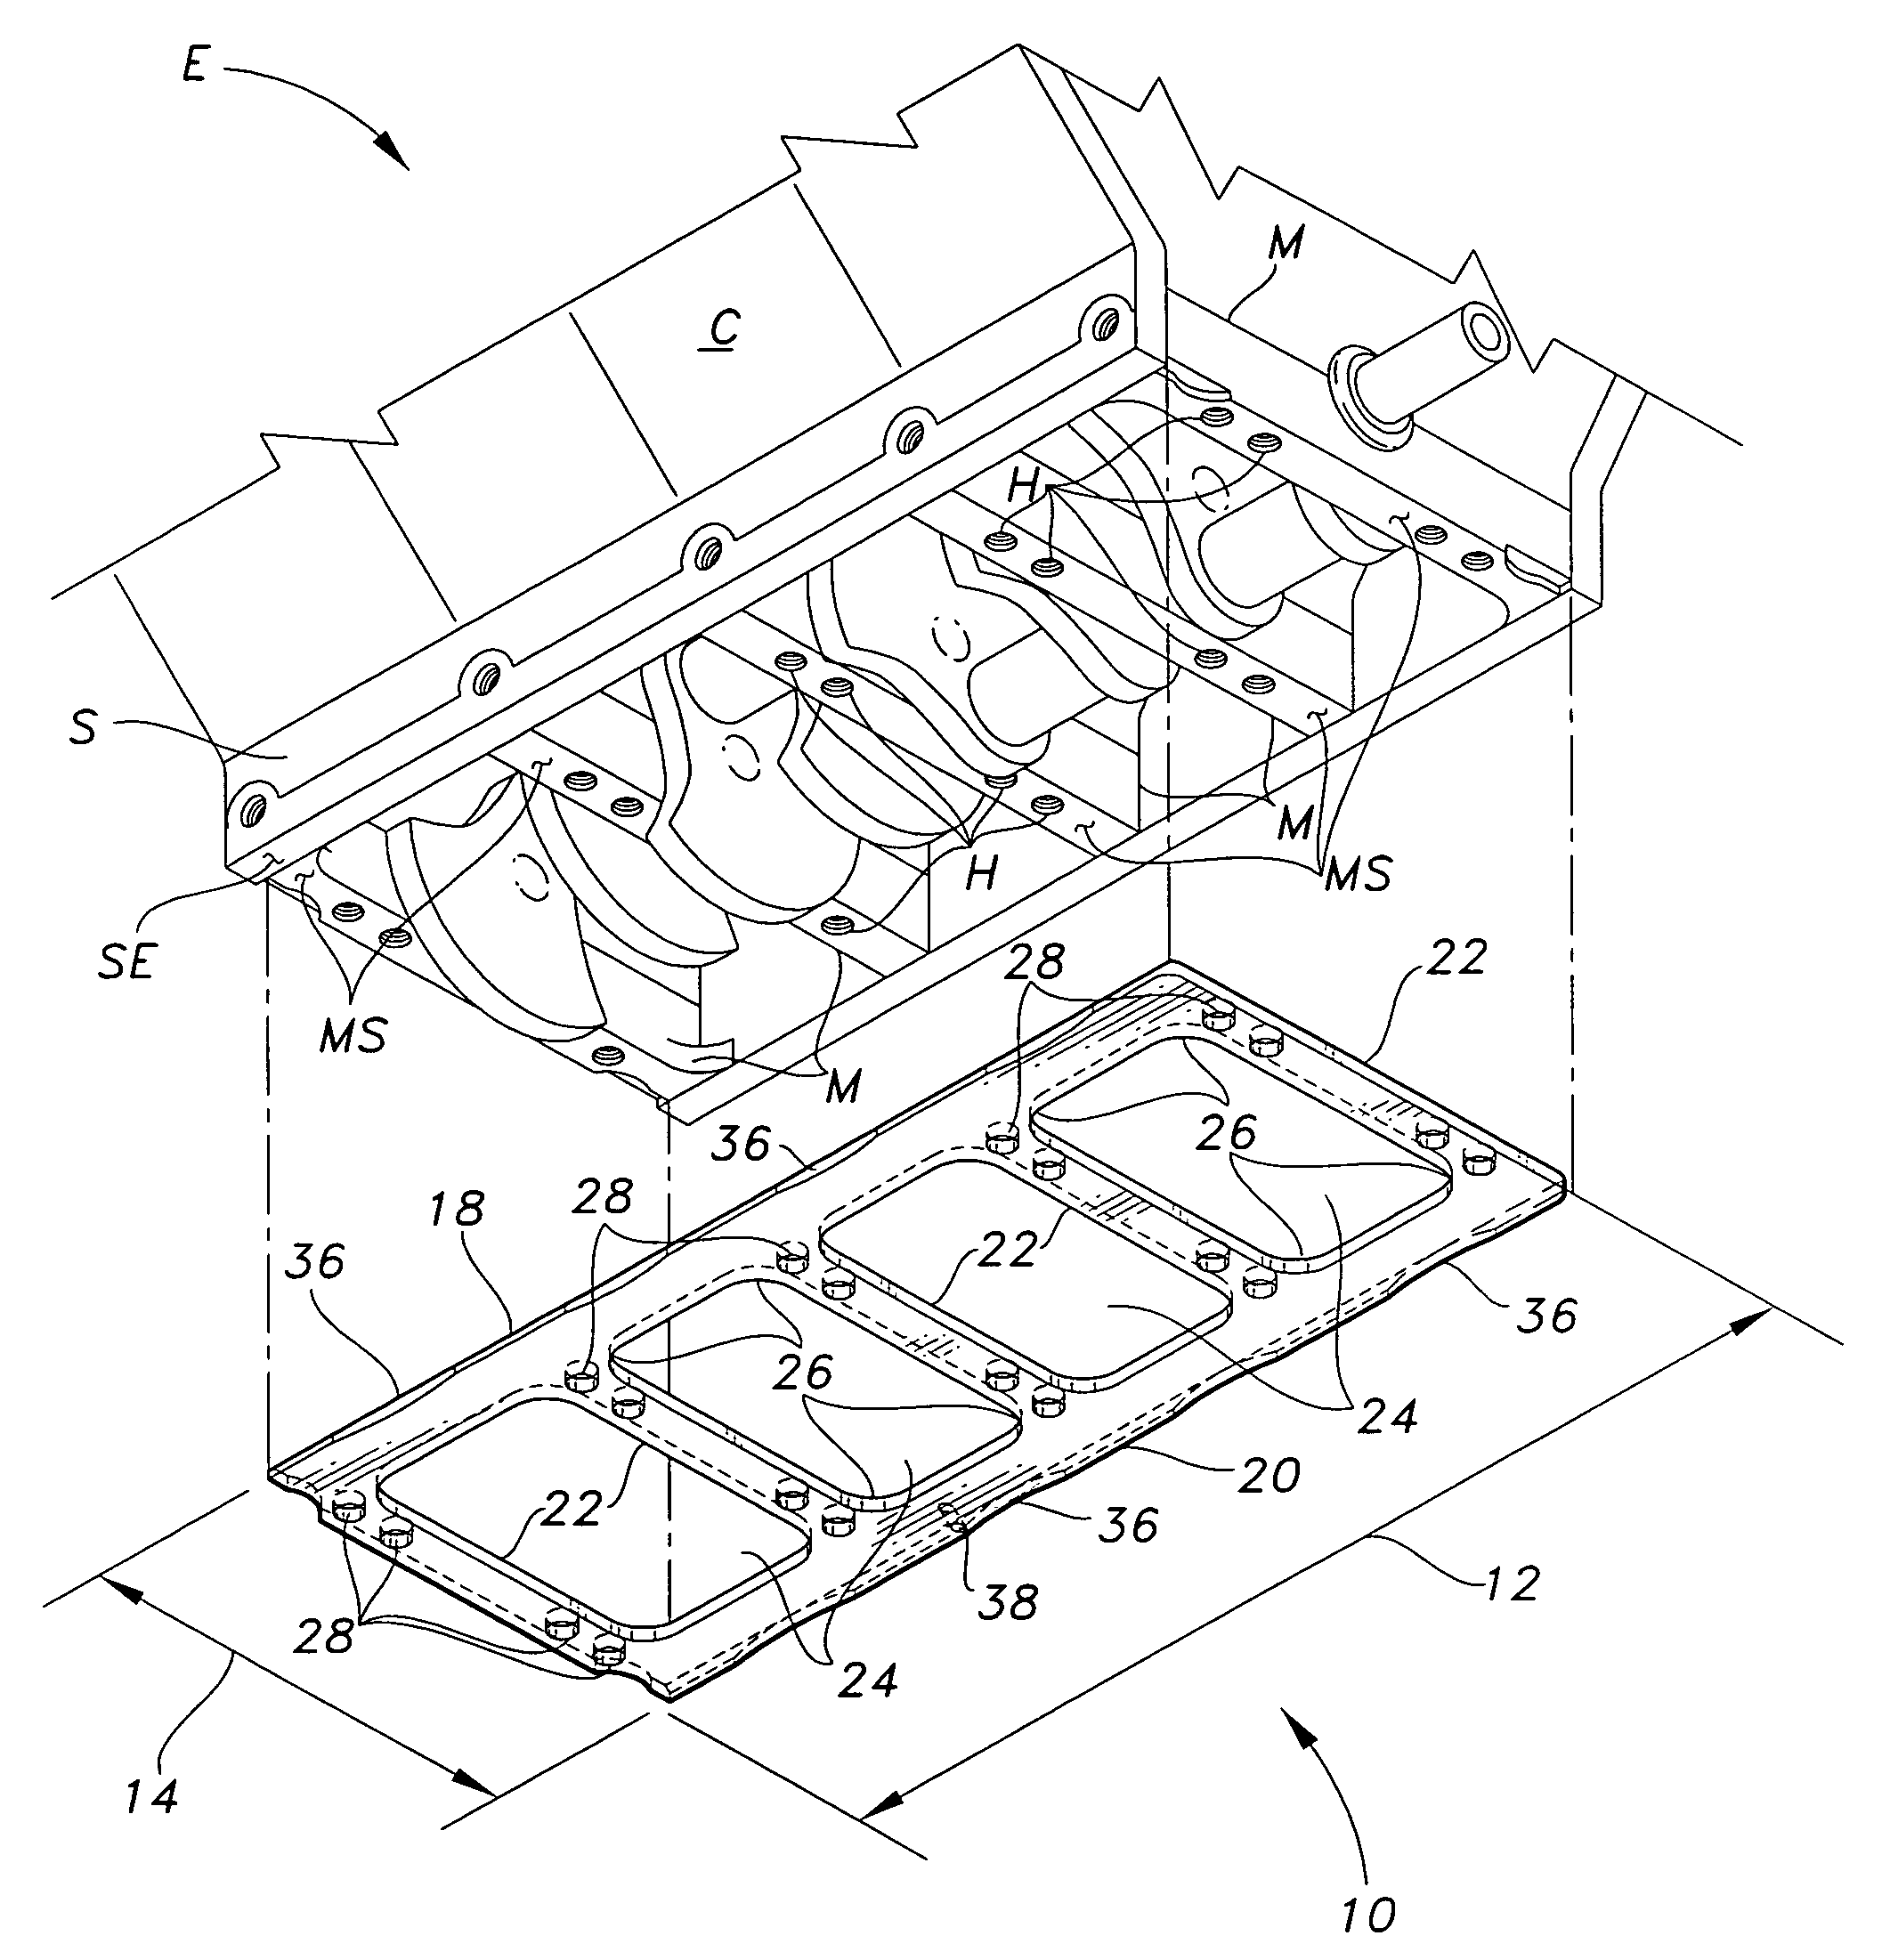 Reinforcement plate for a reciprocating engine